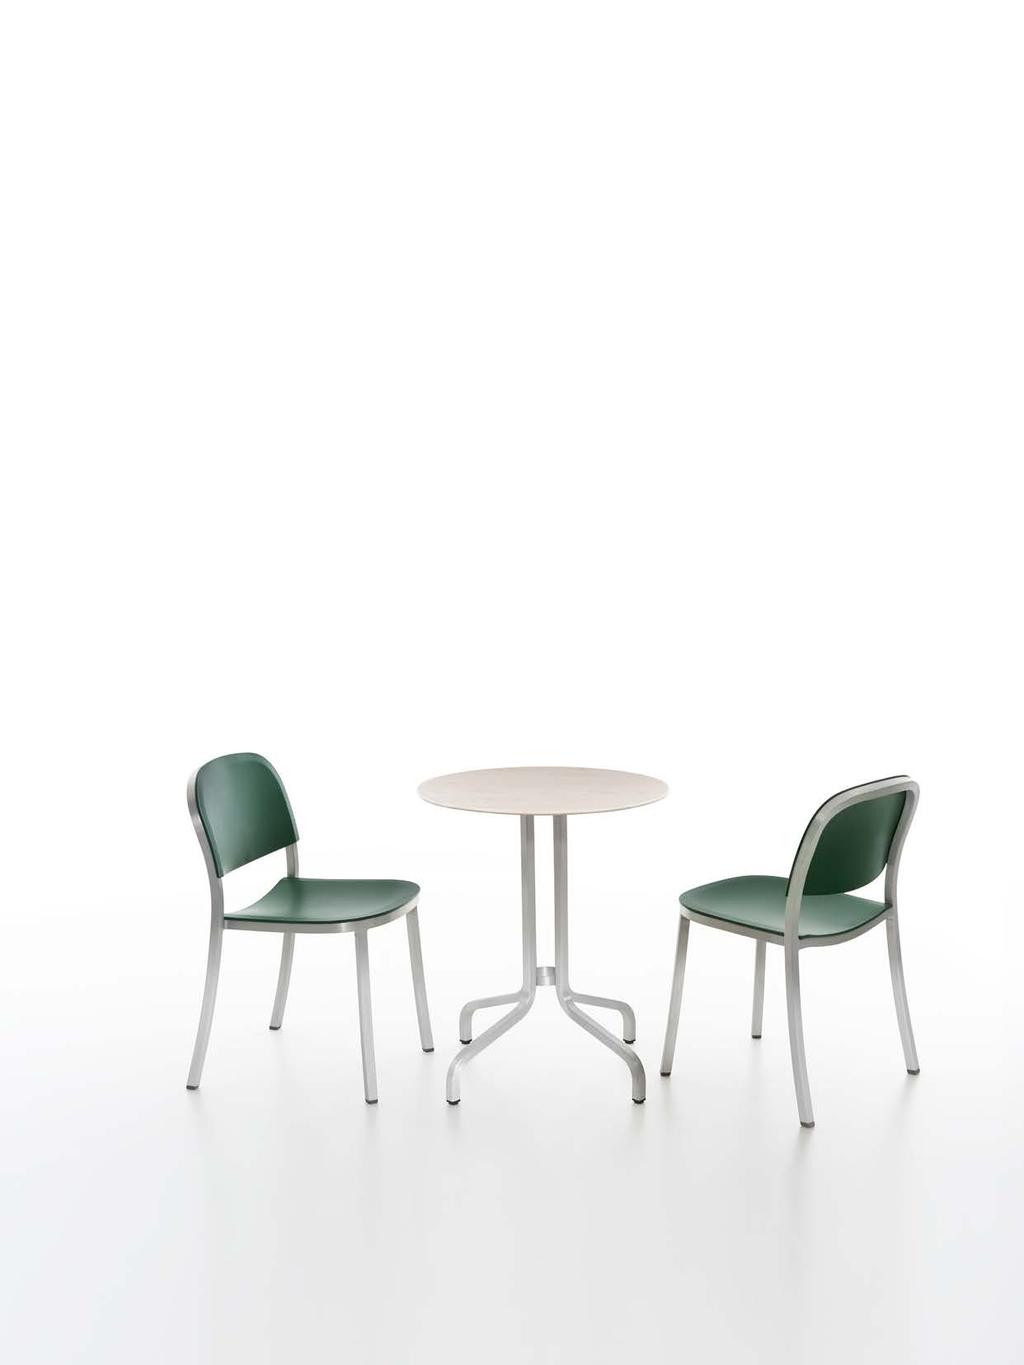 22 Round Café table with table top in solid Ash wood. Chairs with seat and back in Green reclaimed wood polypropylene.